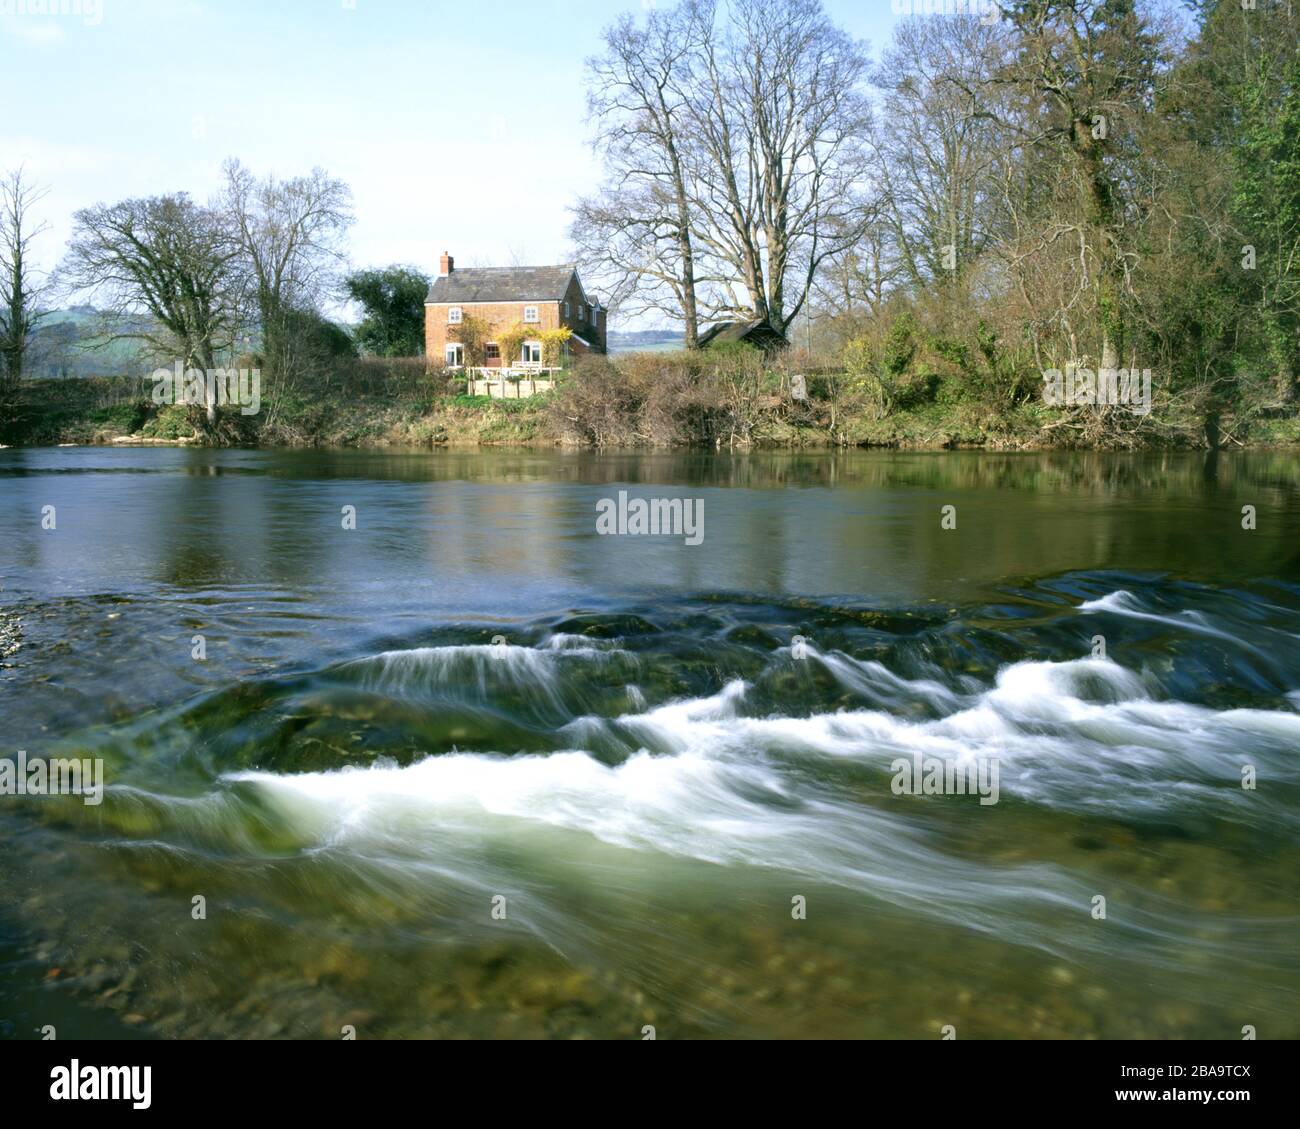 Cottage außer River Wye, Hay on Wye, Monmouthshire, Wales. Stockfoto